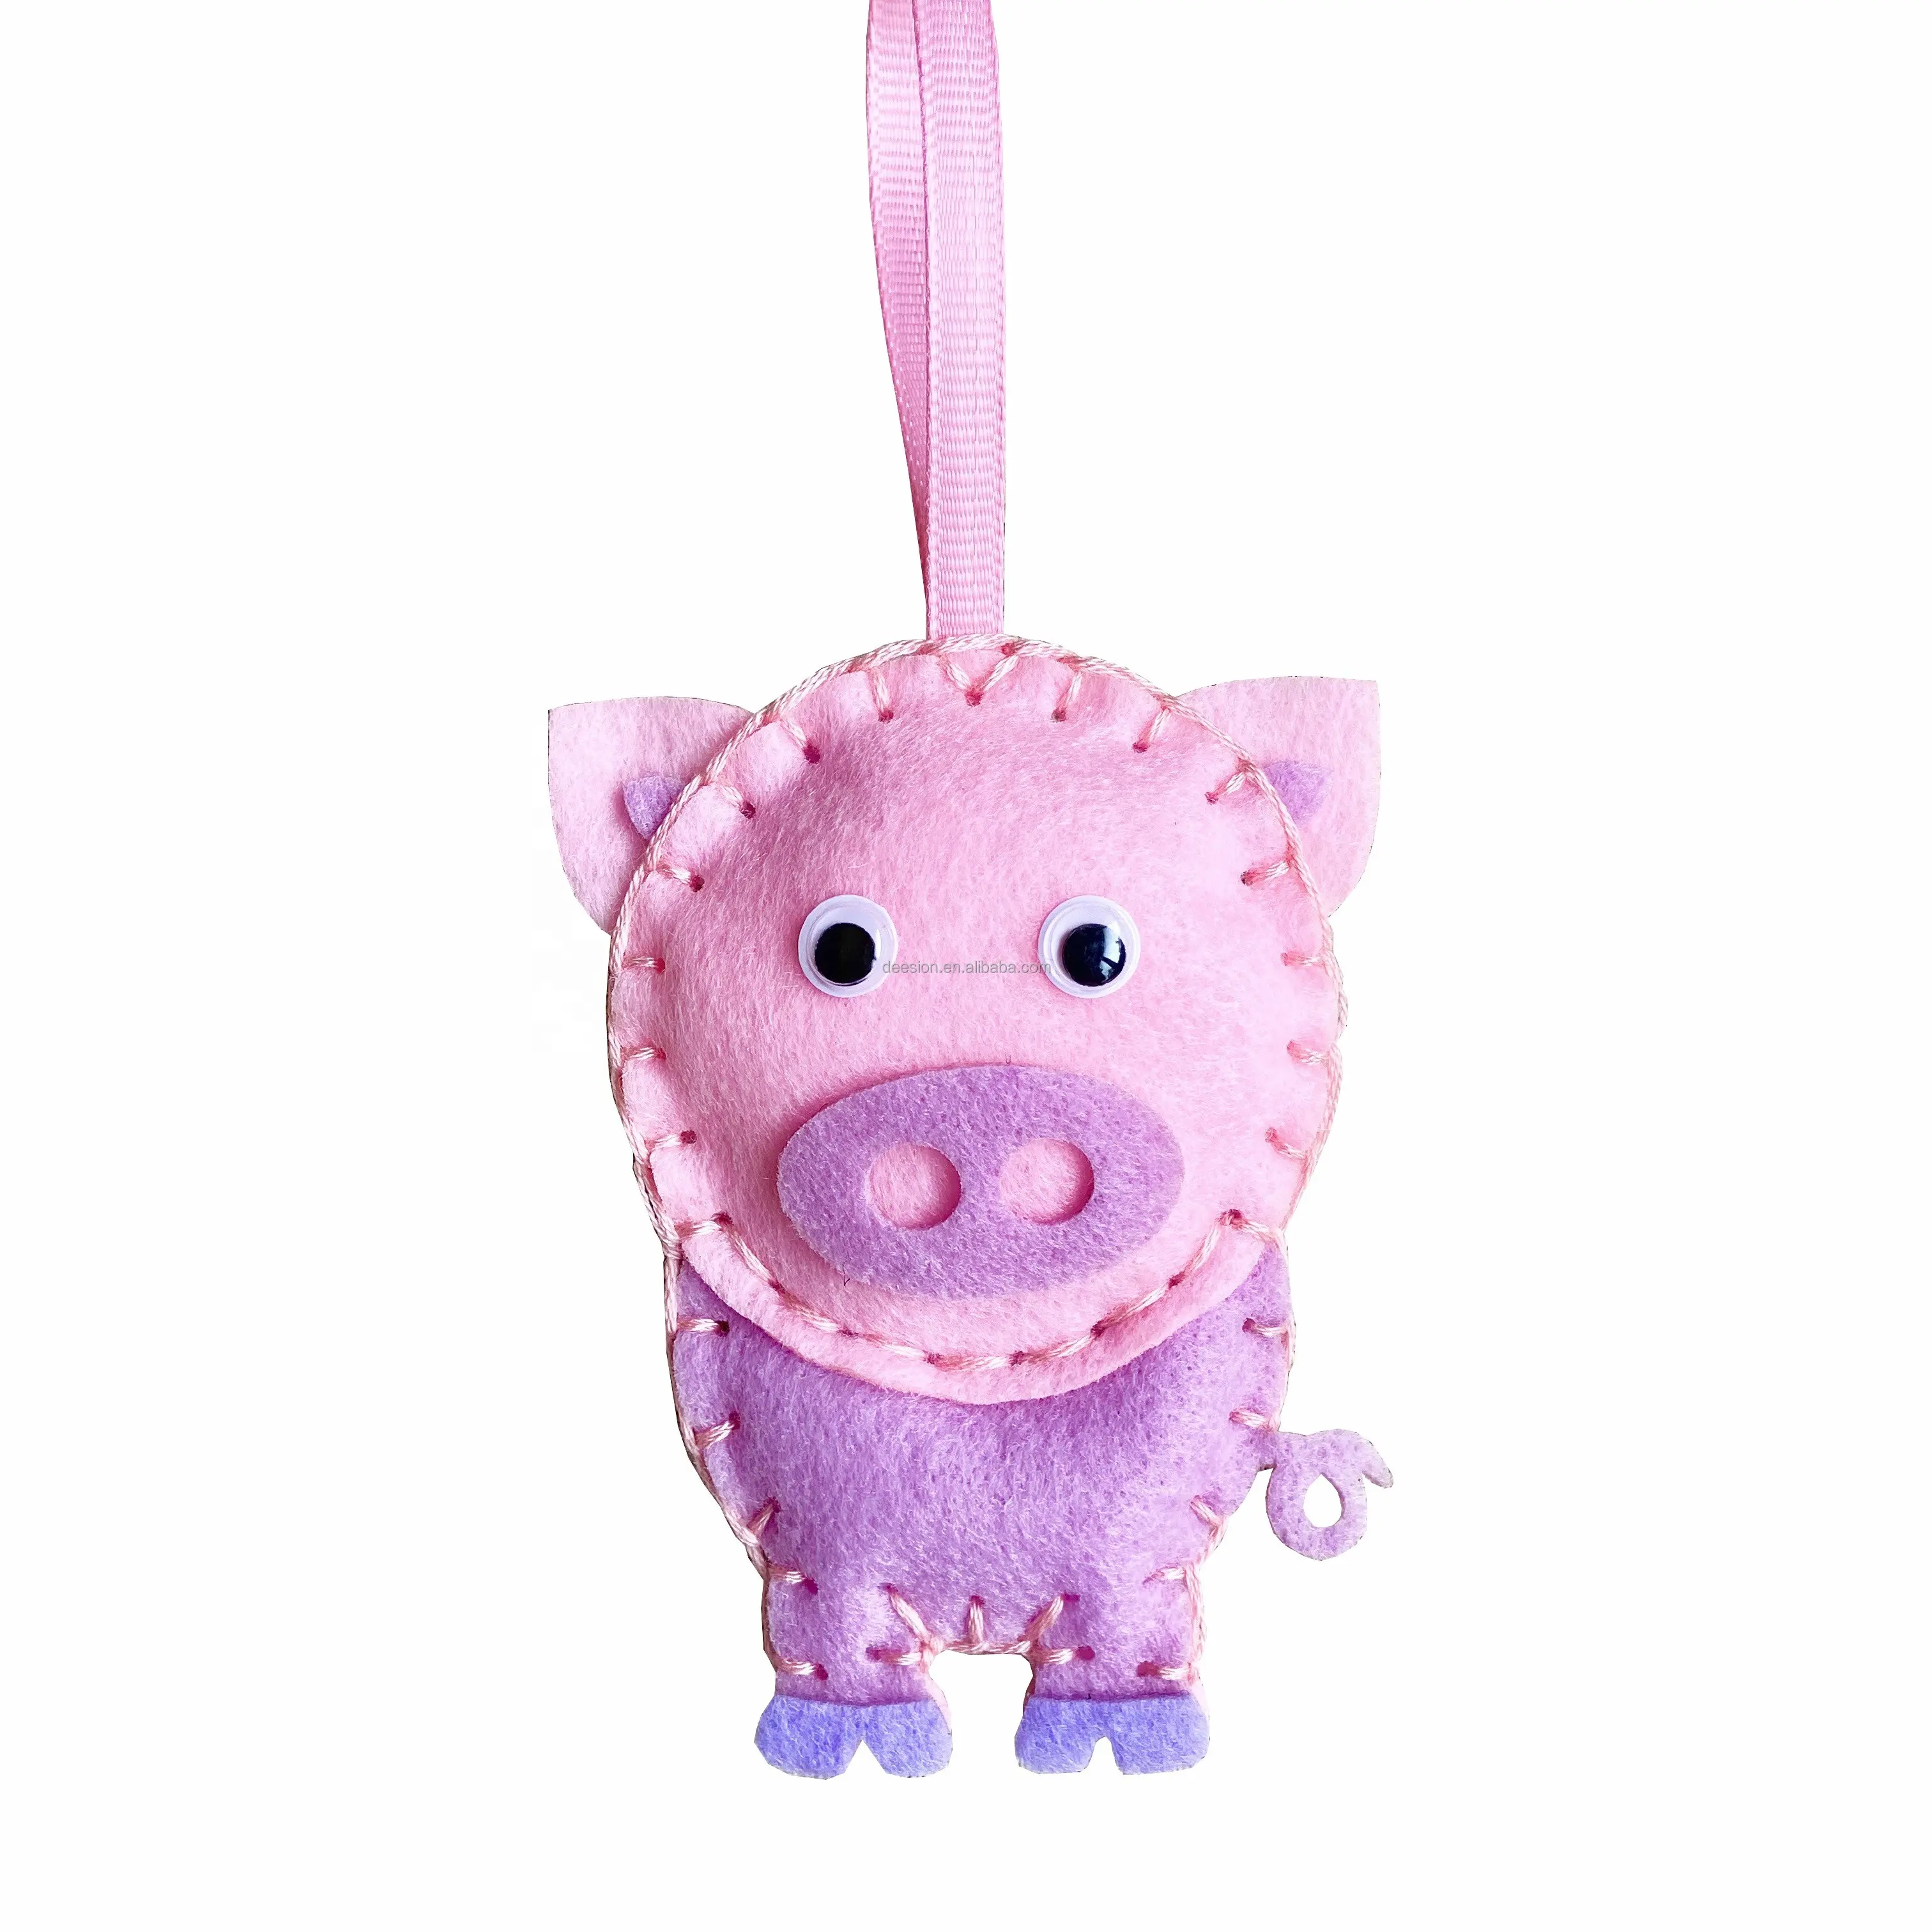 NONE-TOXIC ECO FRIENDLY FELT DIY KIT ANIMAL PIG READY FOR STITCH LEARN TO SEW ART AND CRAFT WITH PLASTIC NEEDLEFOR KIDS